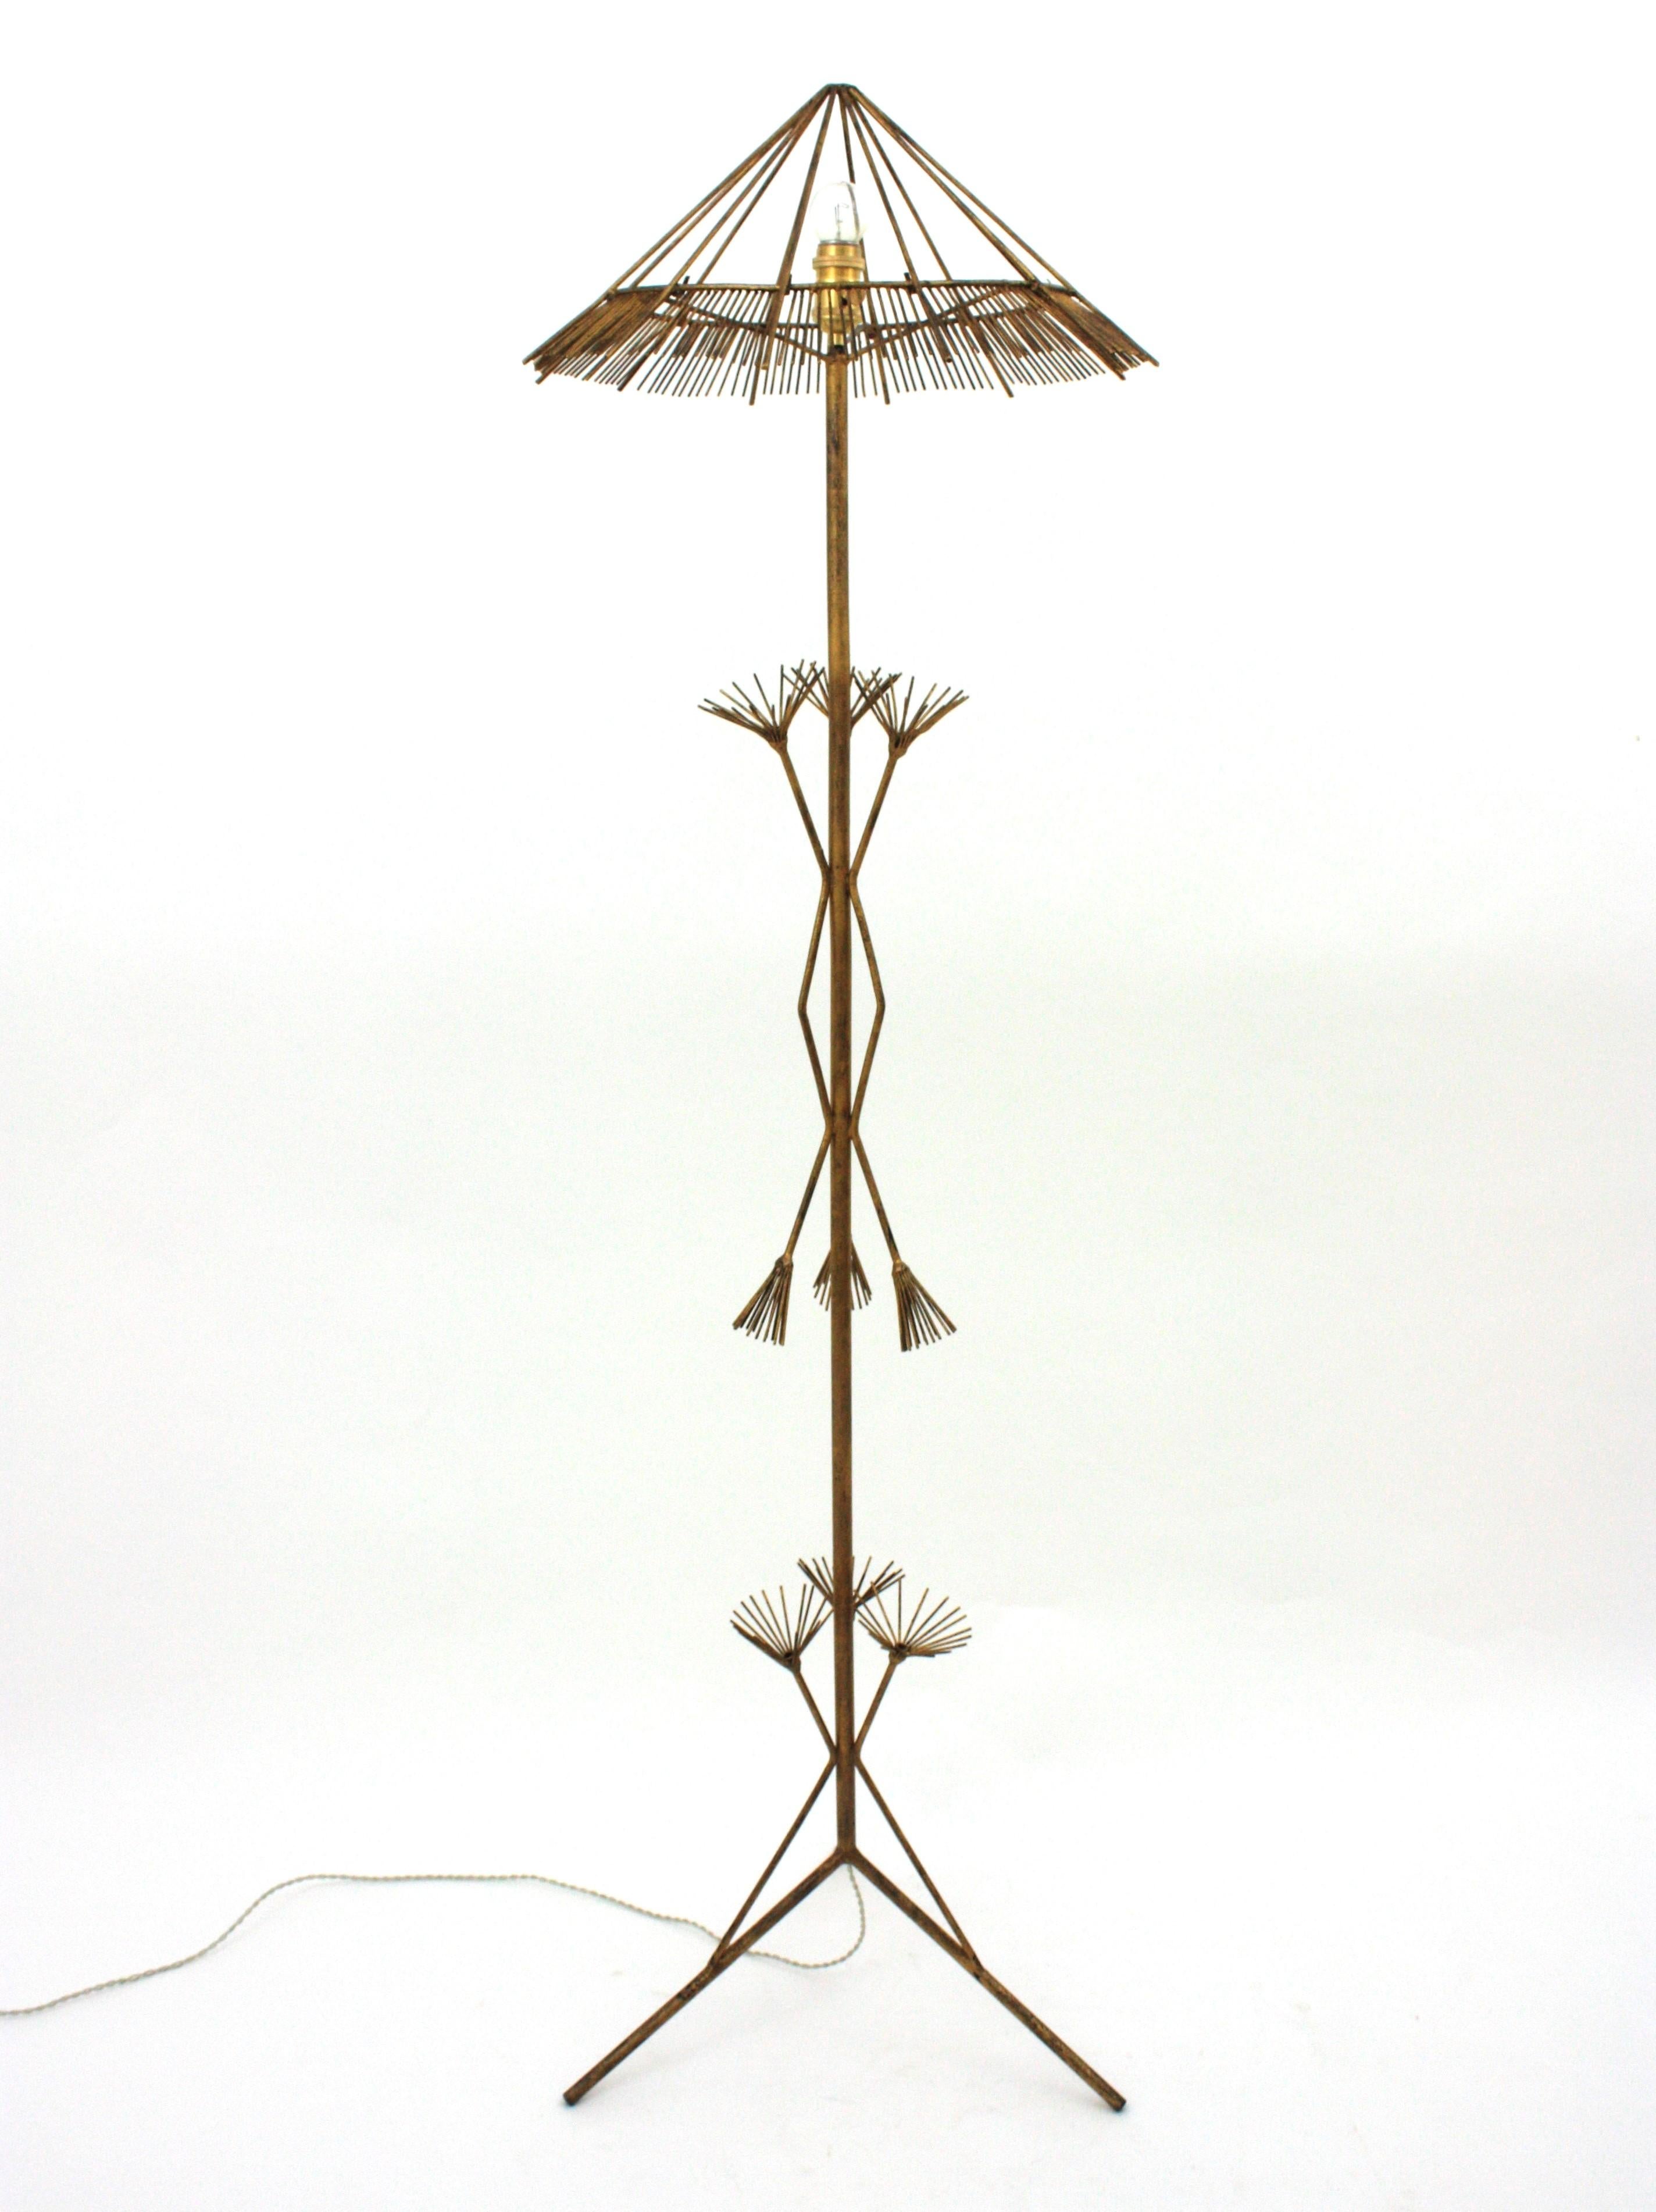 French Midcentury Chinoiserie Gilt Metal Tripod Floor Lamp For Sale 4